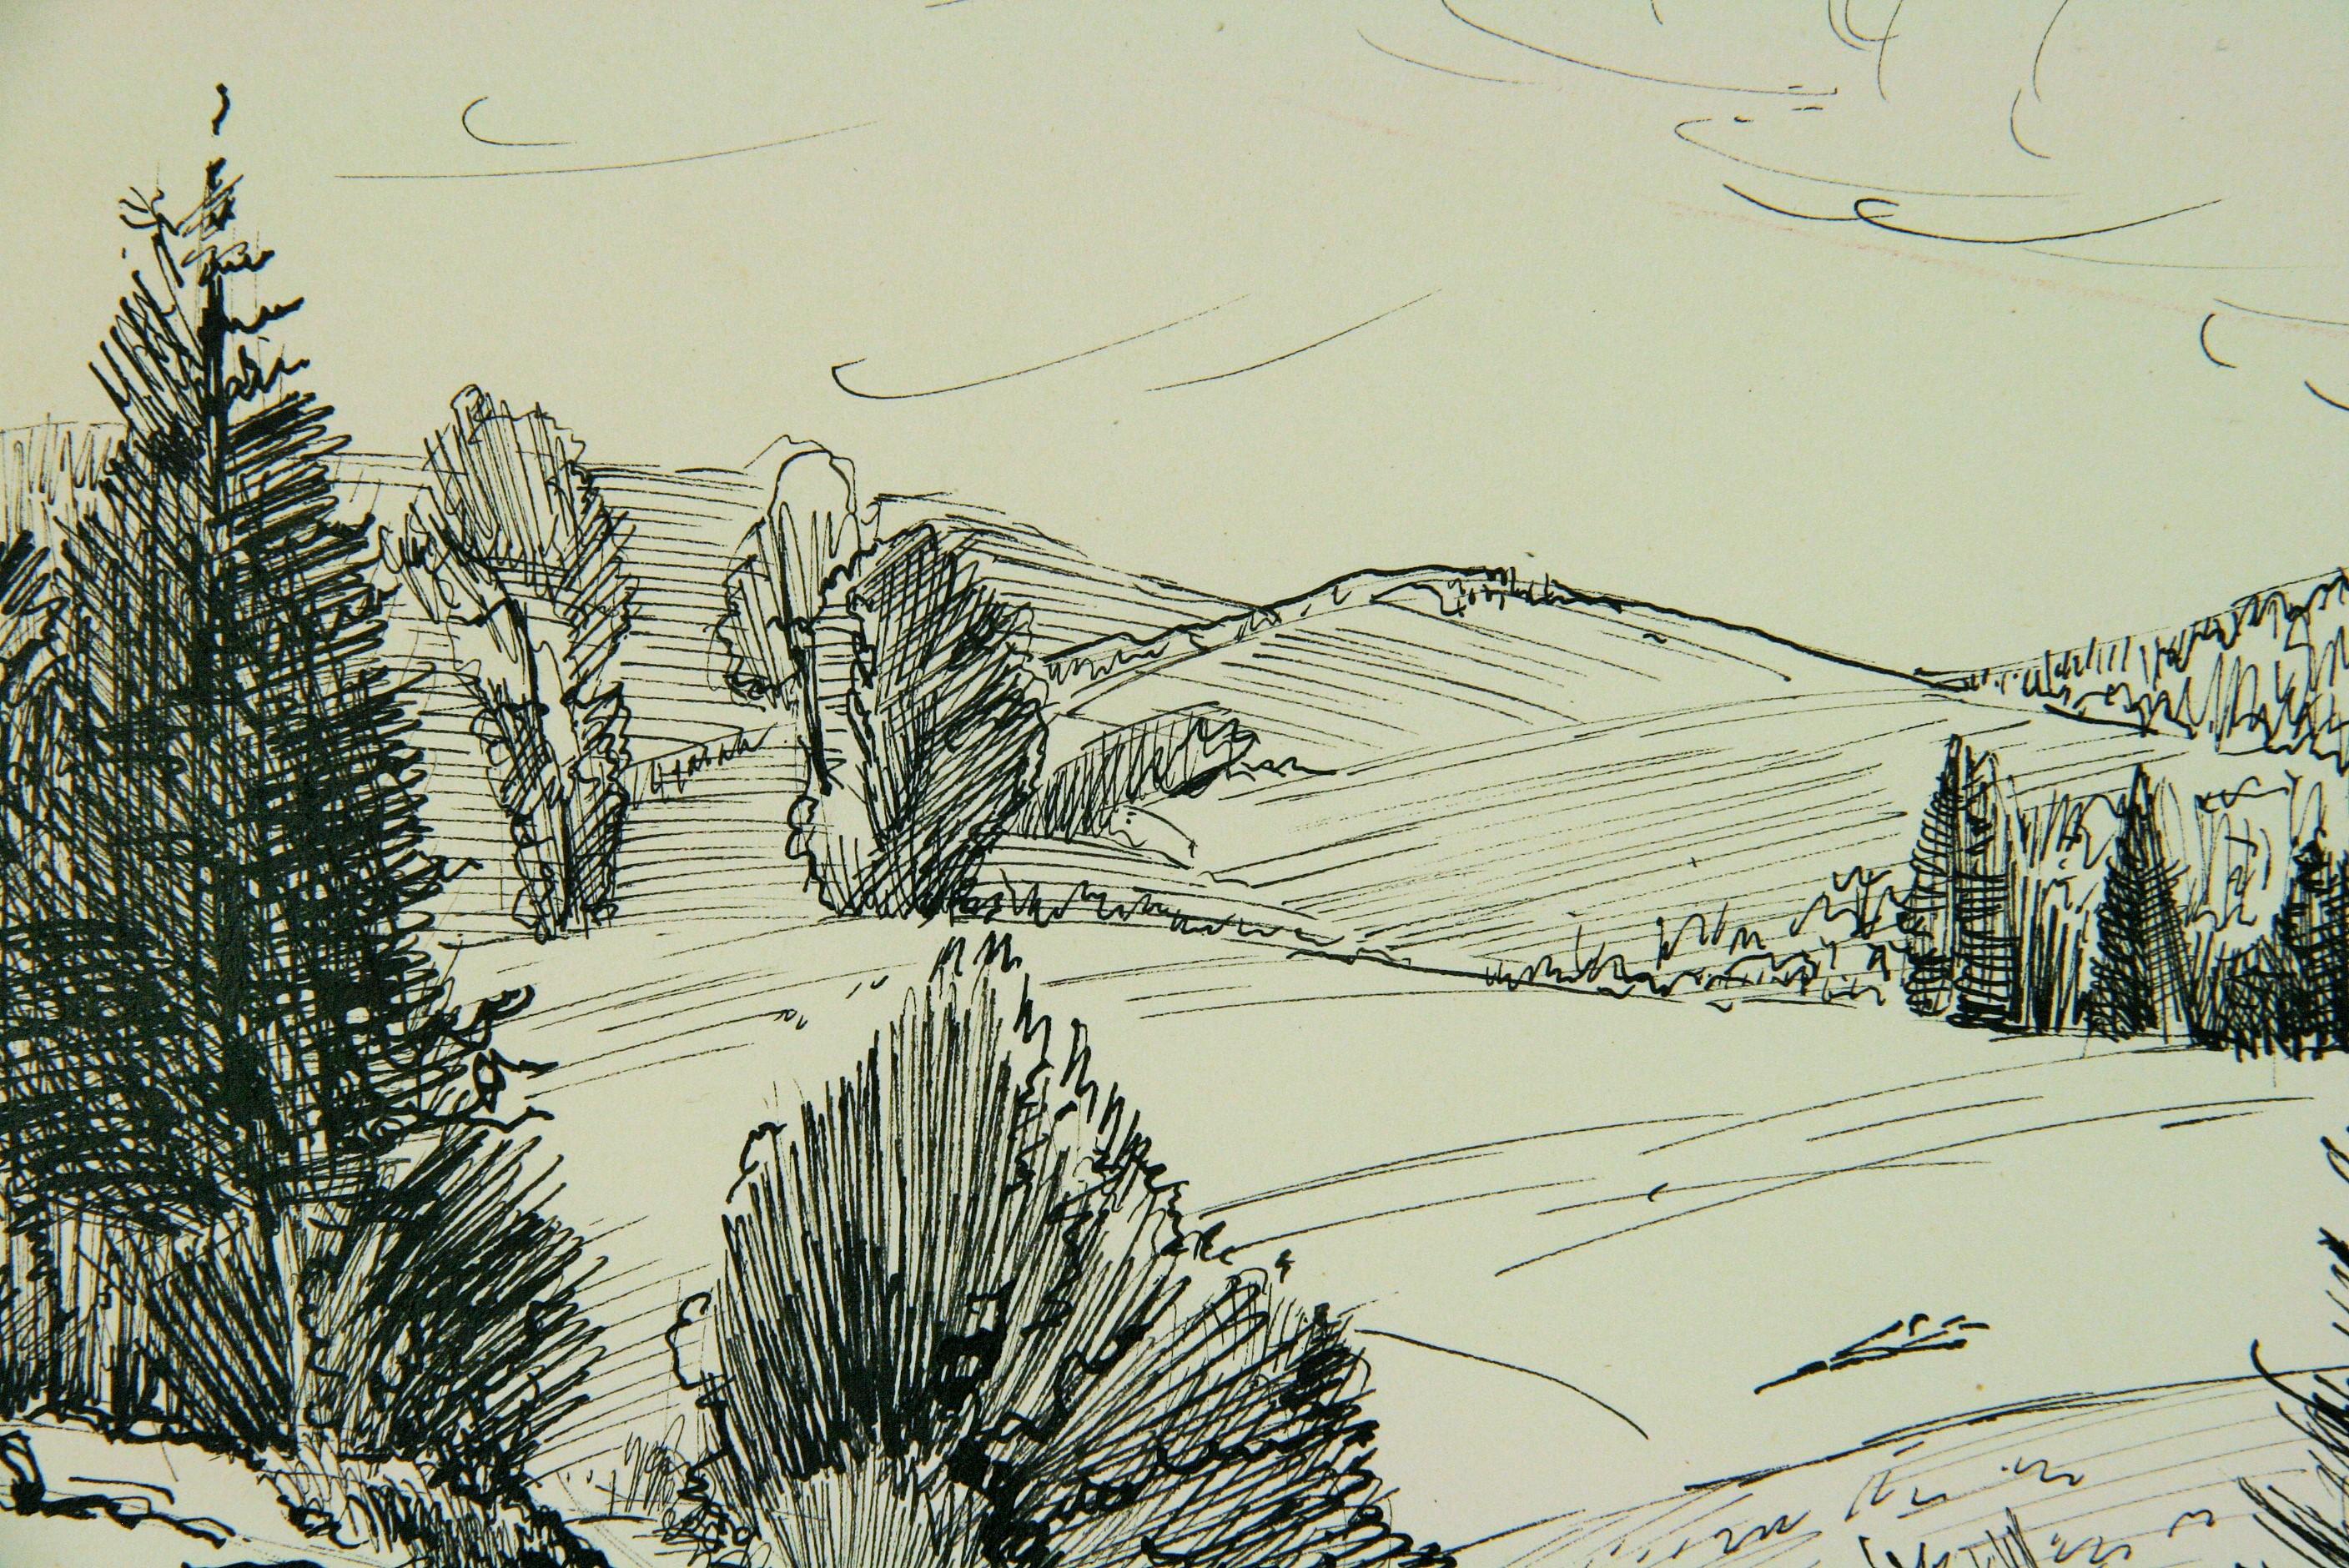 French Countryside Landscape Pen and Ink - Gray Landscape Art by Maurice Falliès